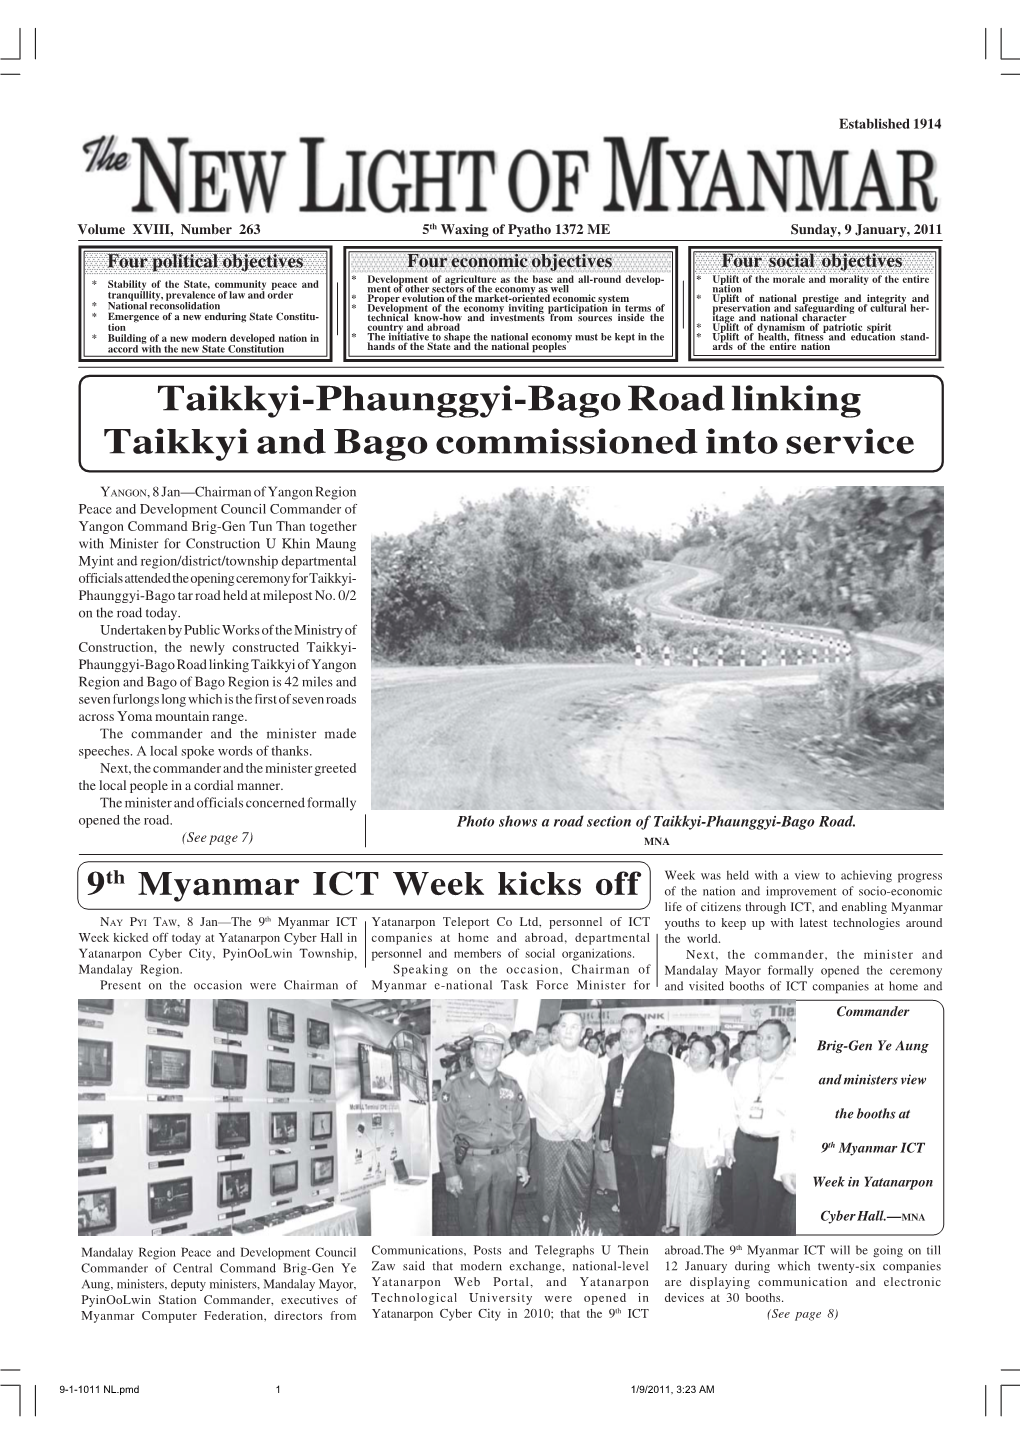 Taikkyi-Phaunggyi-Bago Road Linking Taikkyi and Bago Commissioned Into Service